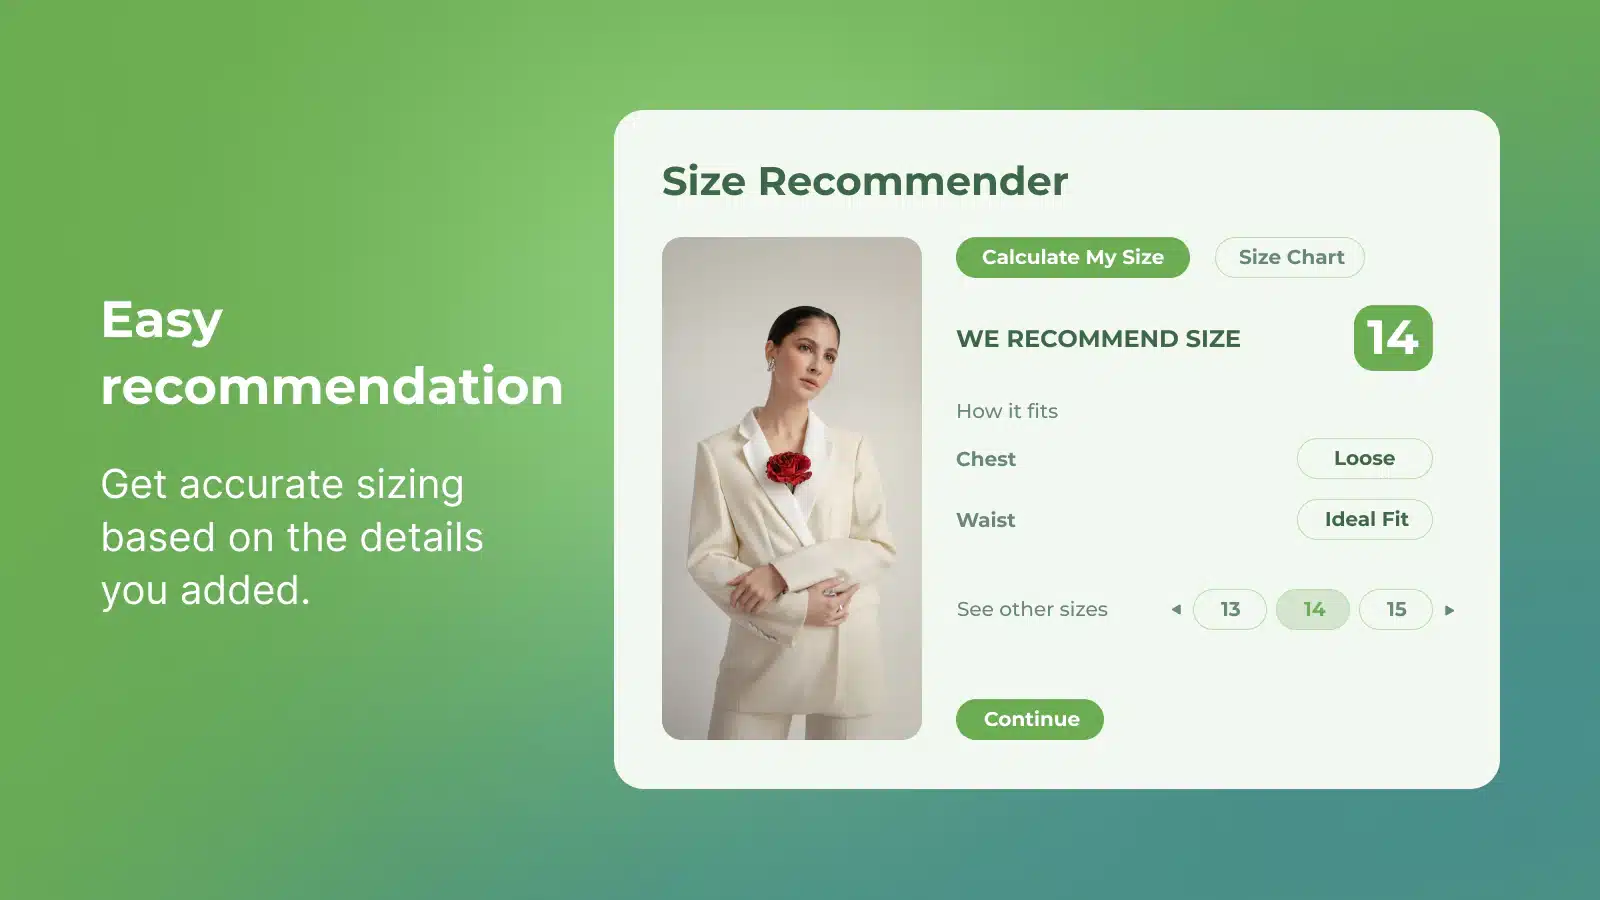 kiwi-size-chart-recommender-accurate-sizing